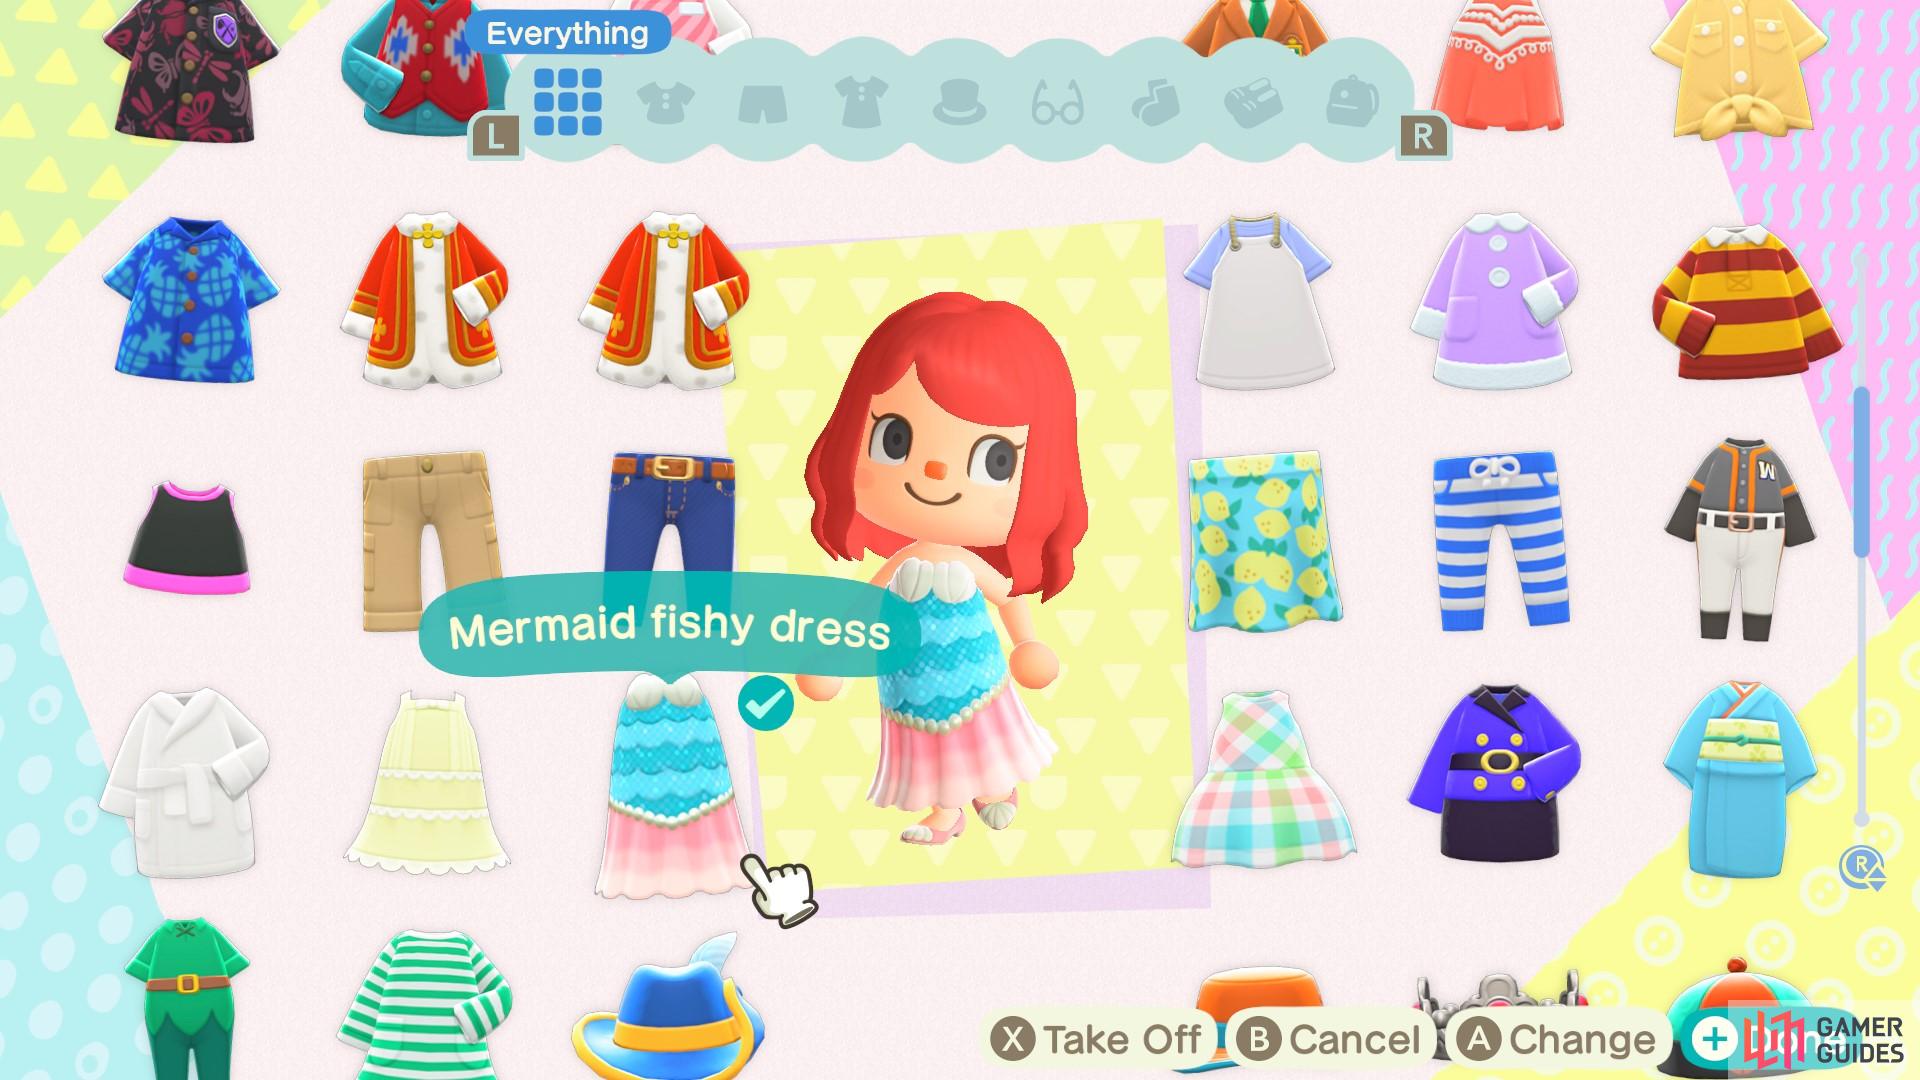 Pascal will sometimes trade Mermaid dresses for scallops.